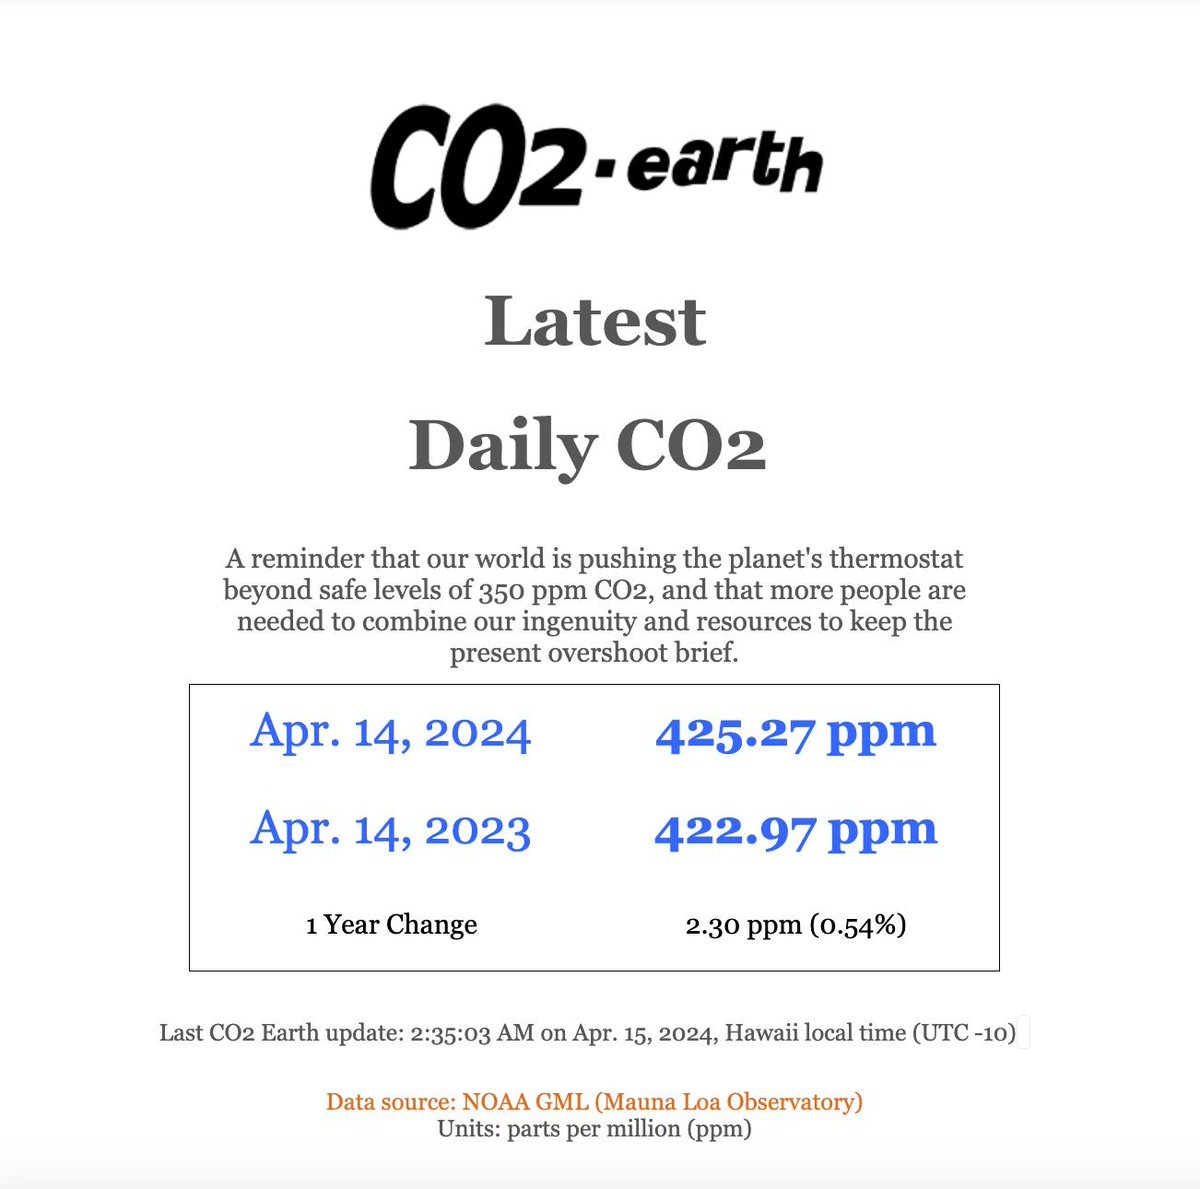 🌎📈 425.27 ppm #CO2 in the atmosphere on Apr. 14 2024 📈 Up 2.30 from 422.97 ppm one year ago 📈🌎 @NOAA Mauna Loa data: gml.noaa.gov/ccgg/trends/mo… 🌎 CO2.Earth Daily: co2.earth/daily-co2 🌎 🙏 Please help keep this 350 overshoot brief 🙏